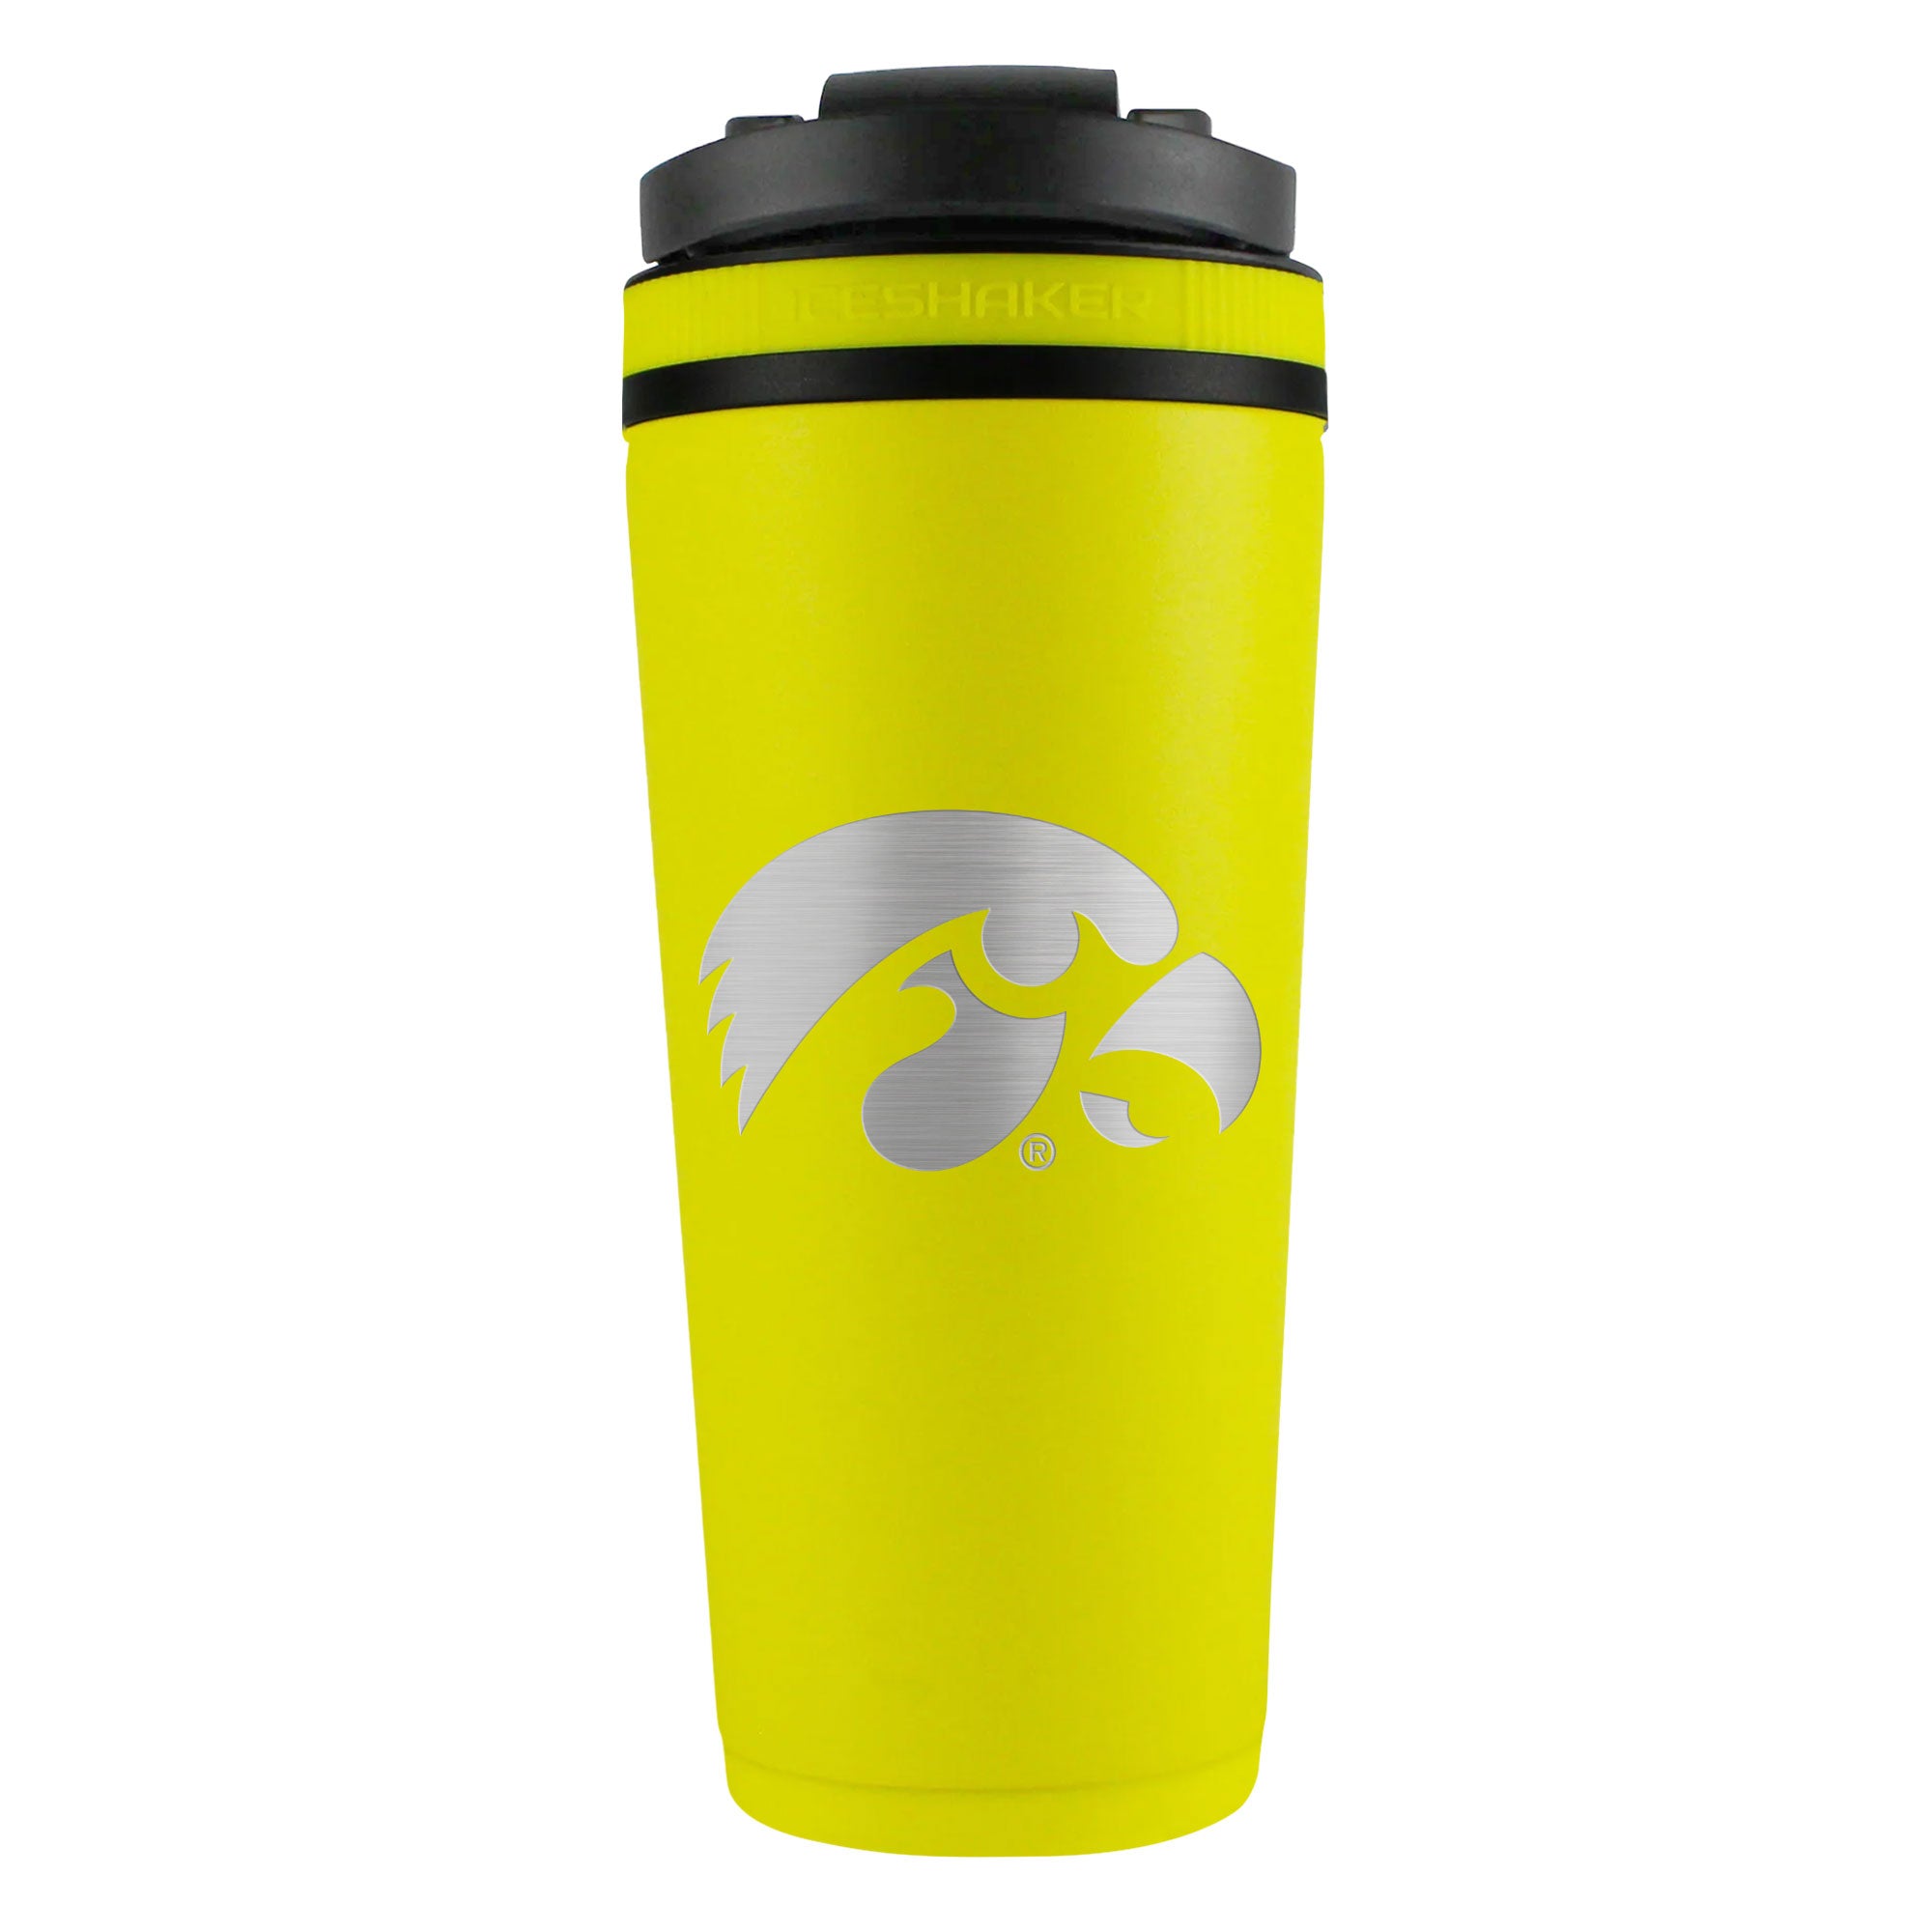 Officially Licensed University of Iowa 26oz Ice Shaker